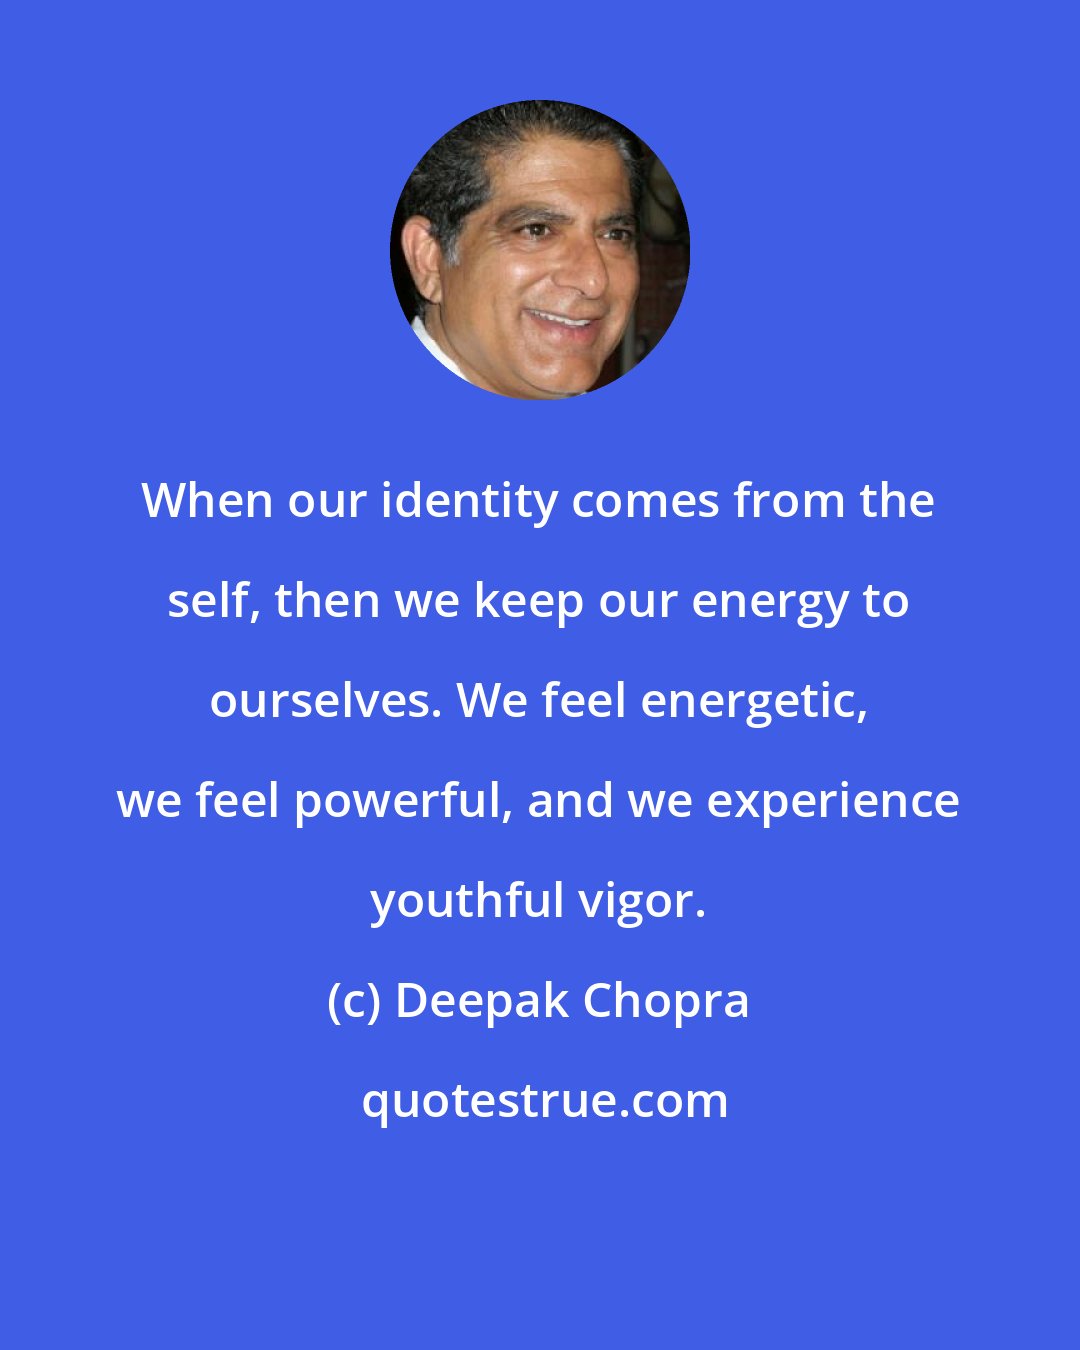 Deepak Chopra: When our identity comes from the self, then we keep our energy to ourselves. We feel energetic, we feel powerful, and we experience youthful vigor.